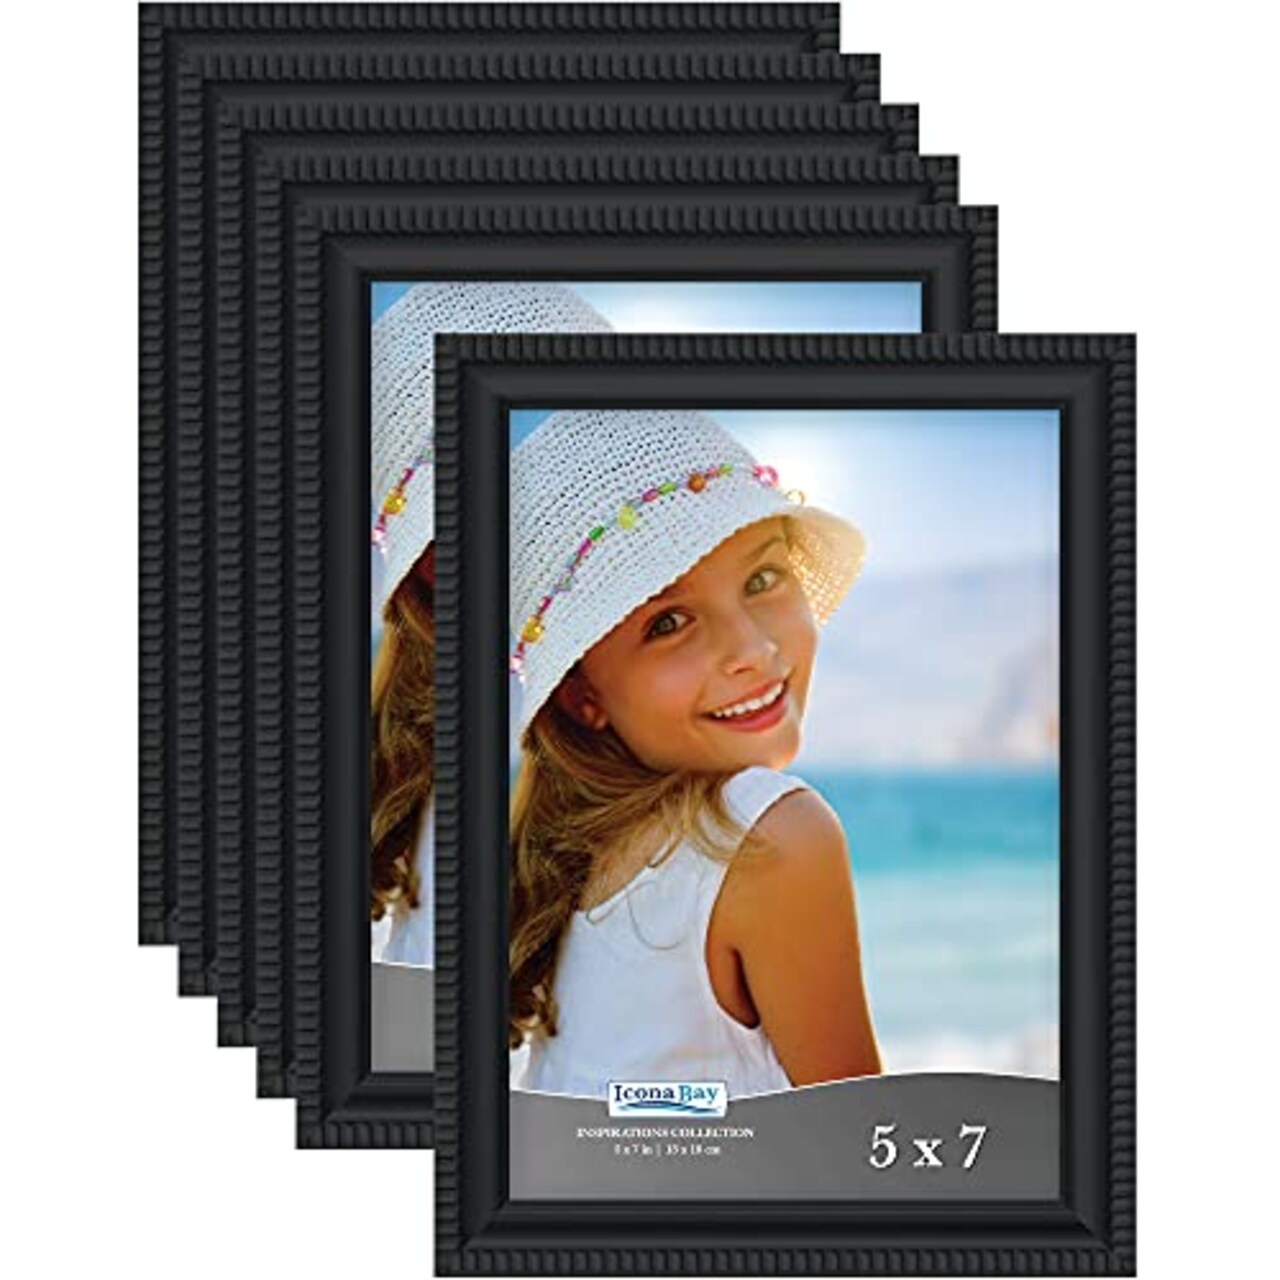 Icona Bay 5x7 Picture Frames (Black, 6 Pack), Beautifully Detailed Molding,  Contemporary Picture Frame Set, Wall Mount or Table Top, Inspirations  Collection